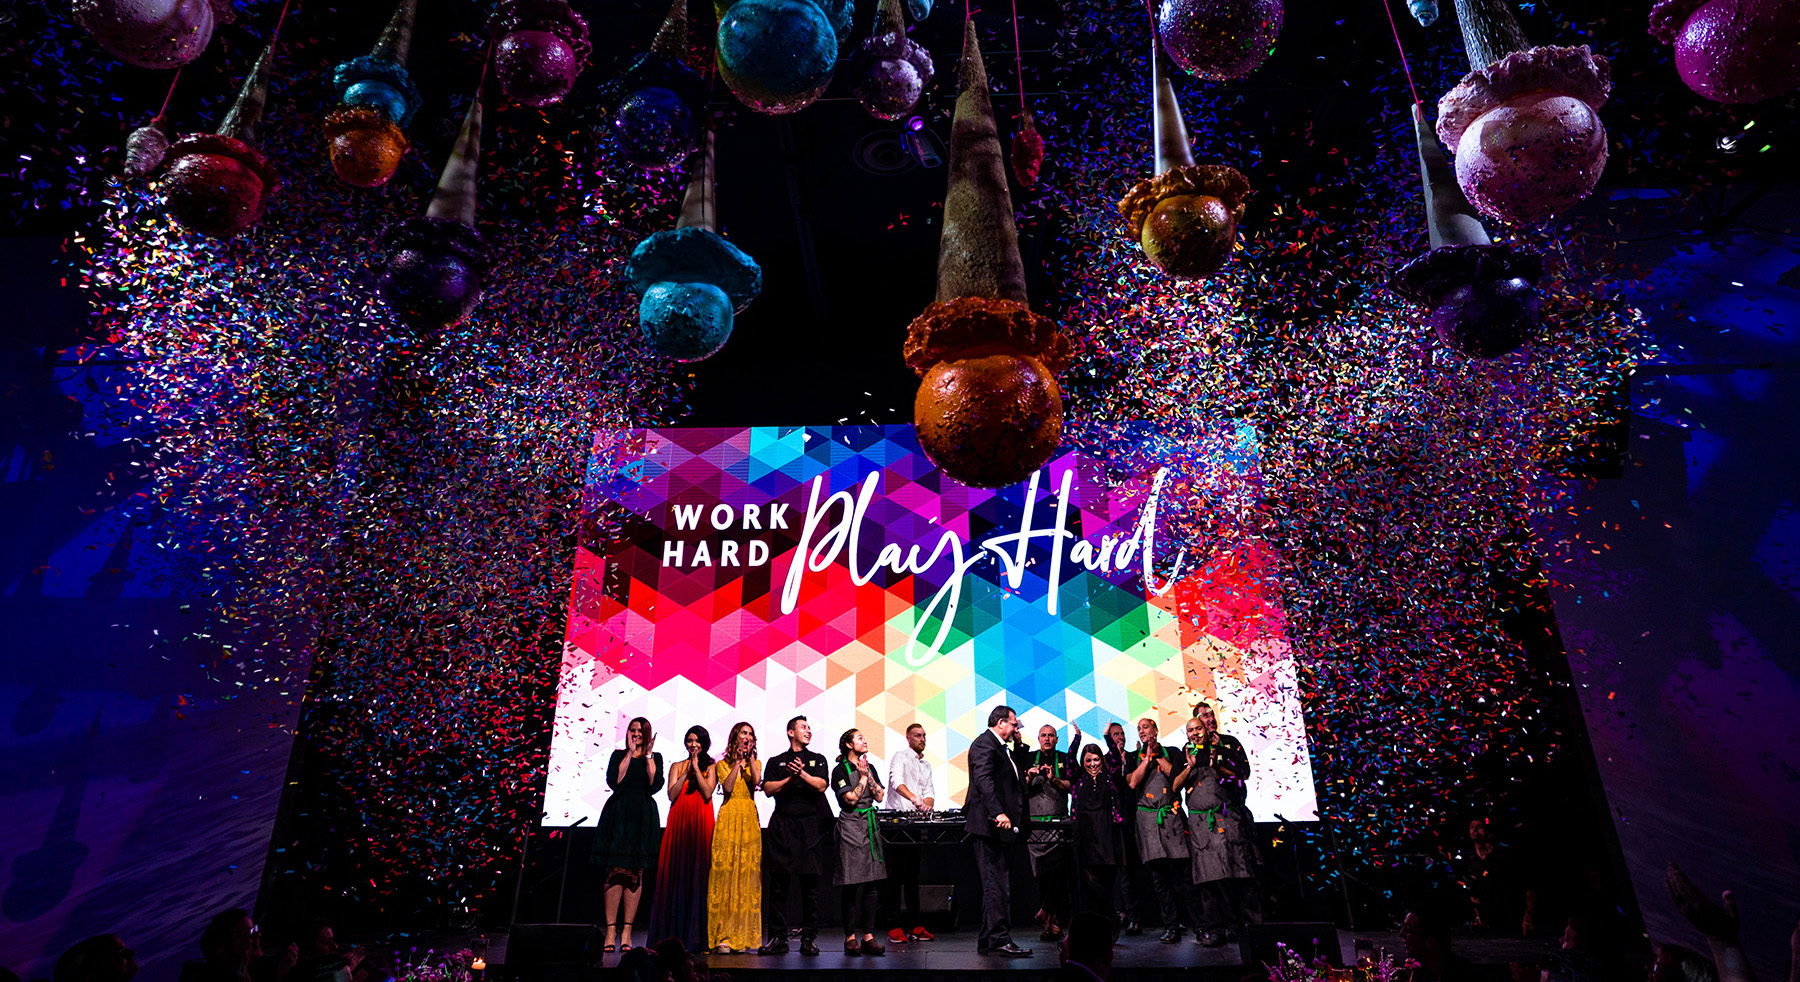 Corporate event celebration with confetti and staff members clapping